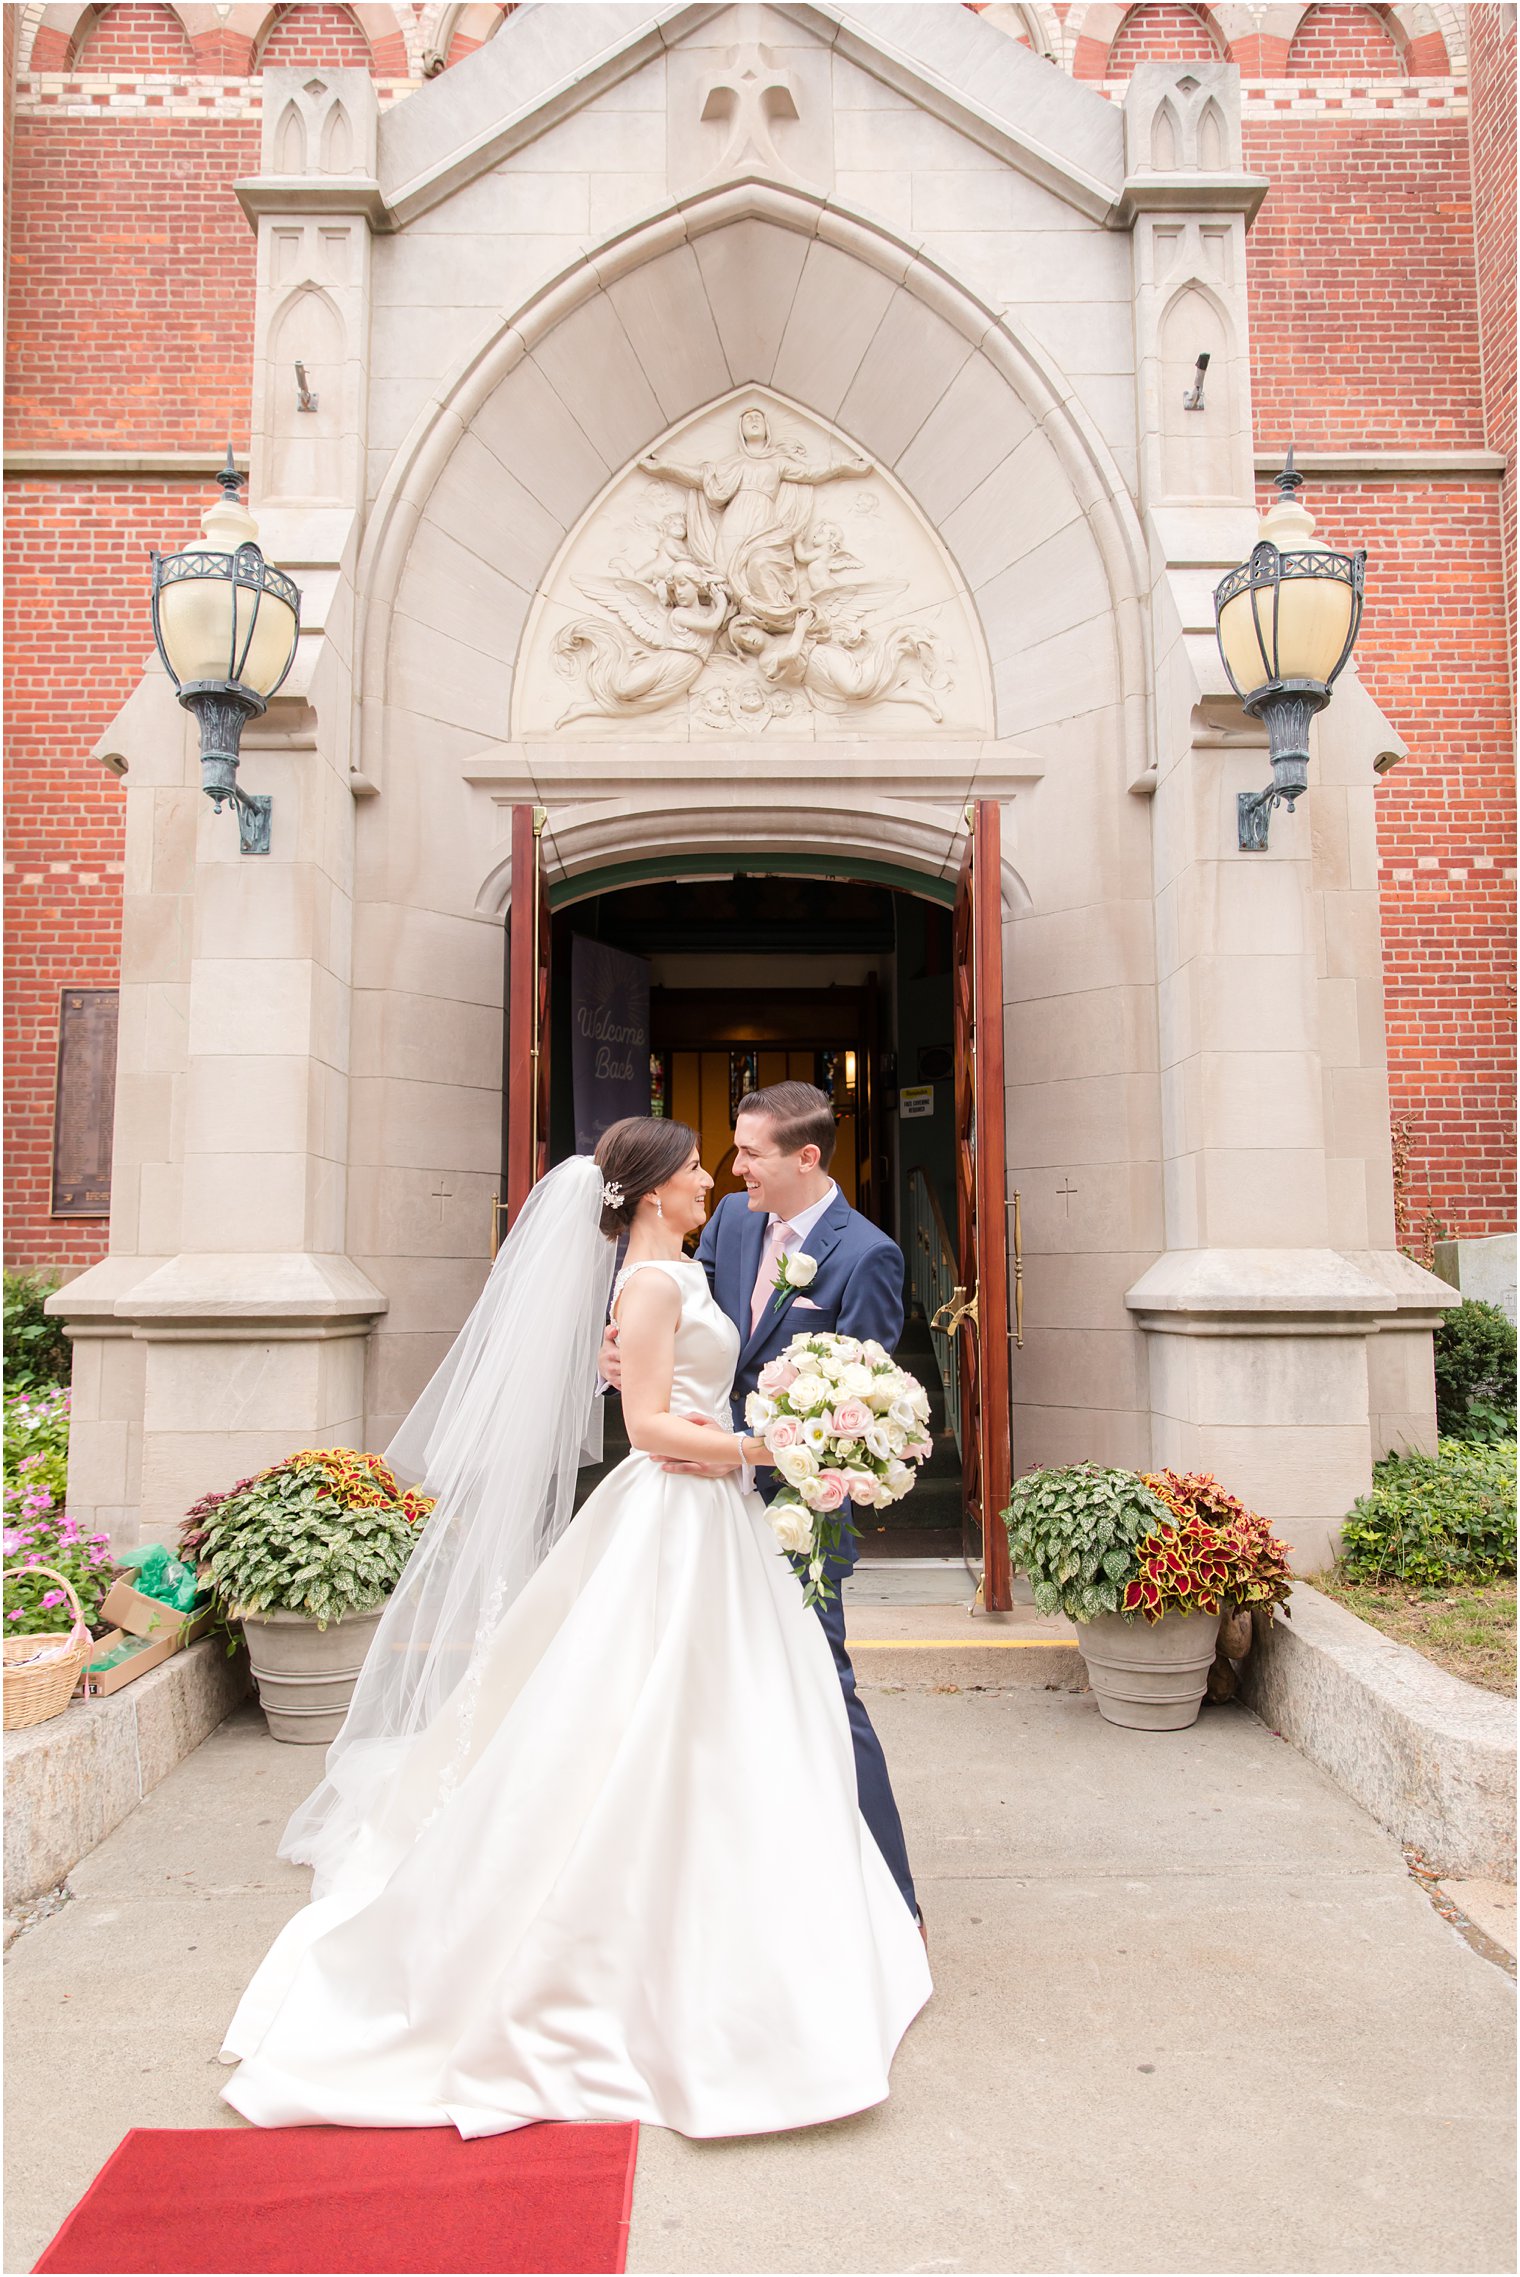 Bride and groom exiting church at Church of the Assumption in Morristown, NJ